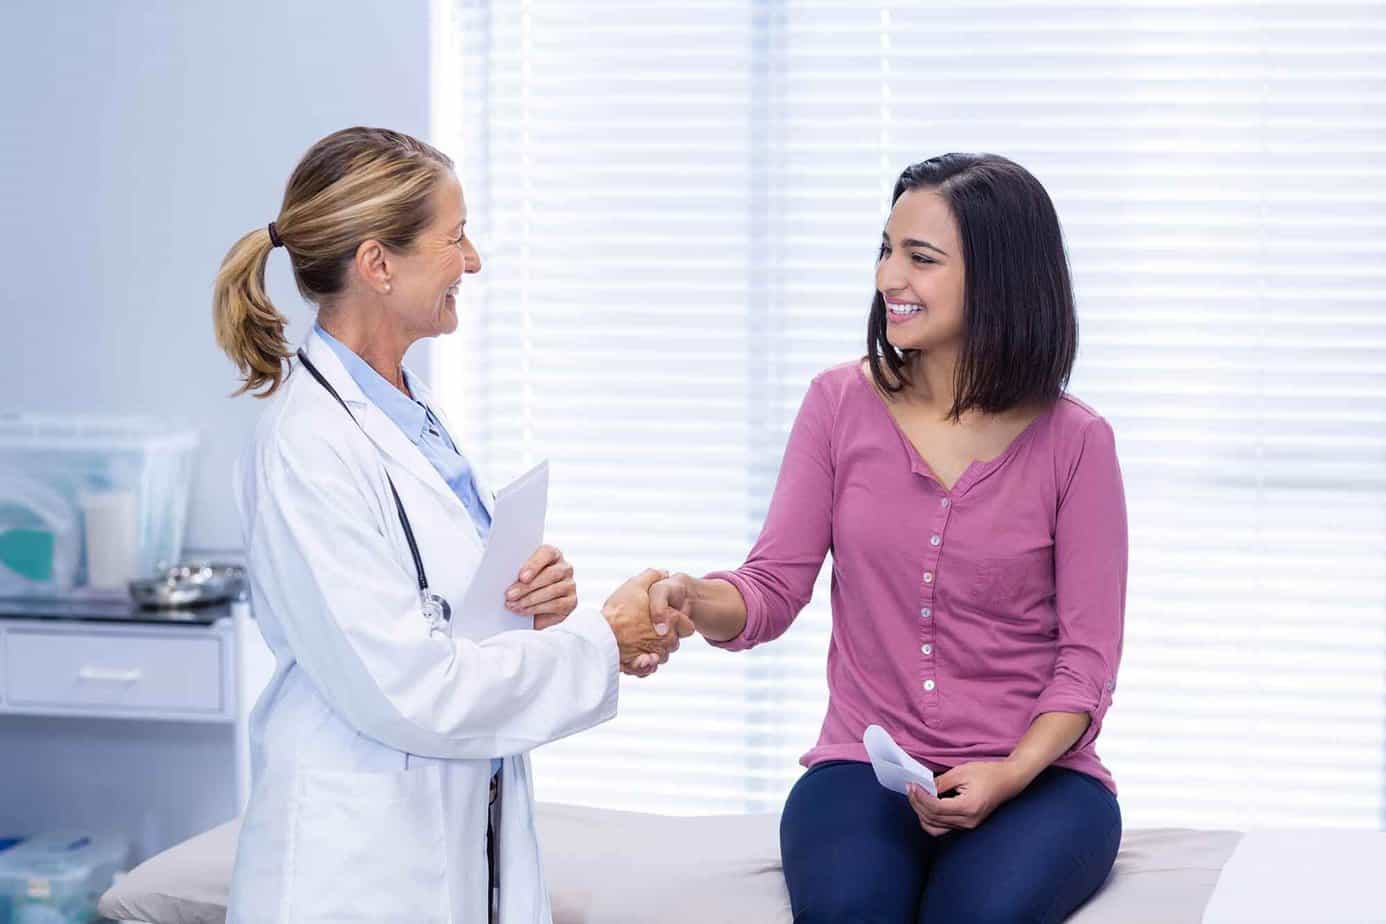 Female client sitting on medical examination table shaking hands with a doctor